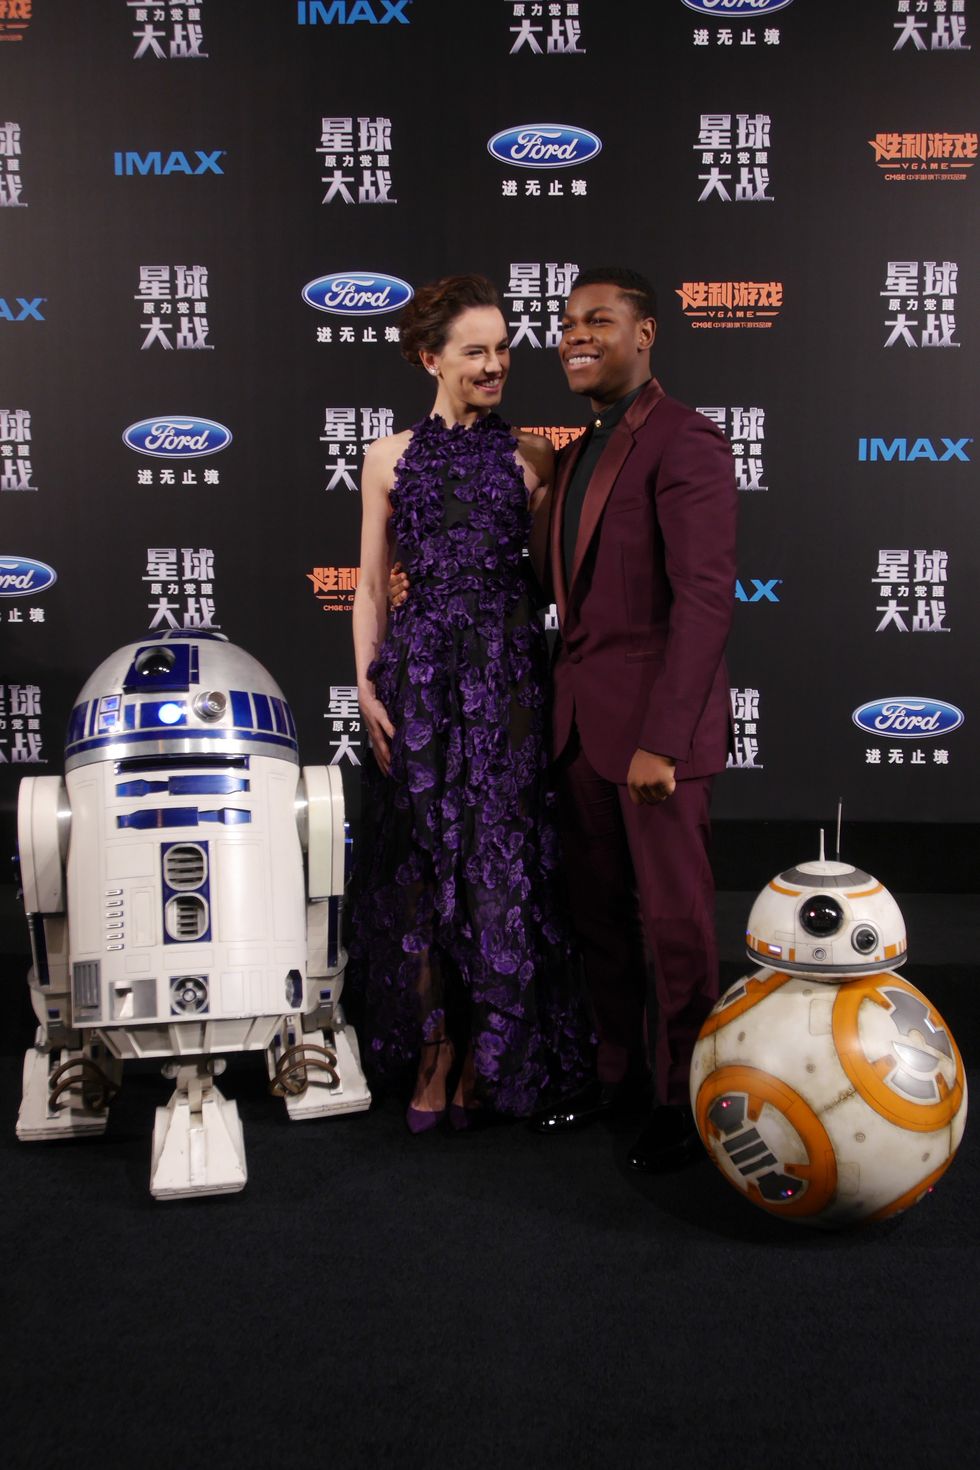 Daisy Ridley wearing a purple dress with John Boyega wearing a burgundy suit at the Shanghai Star Wars: The Force Awakens premiere